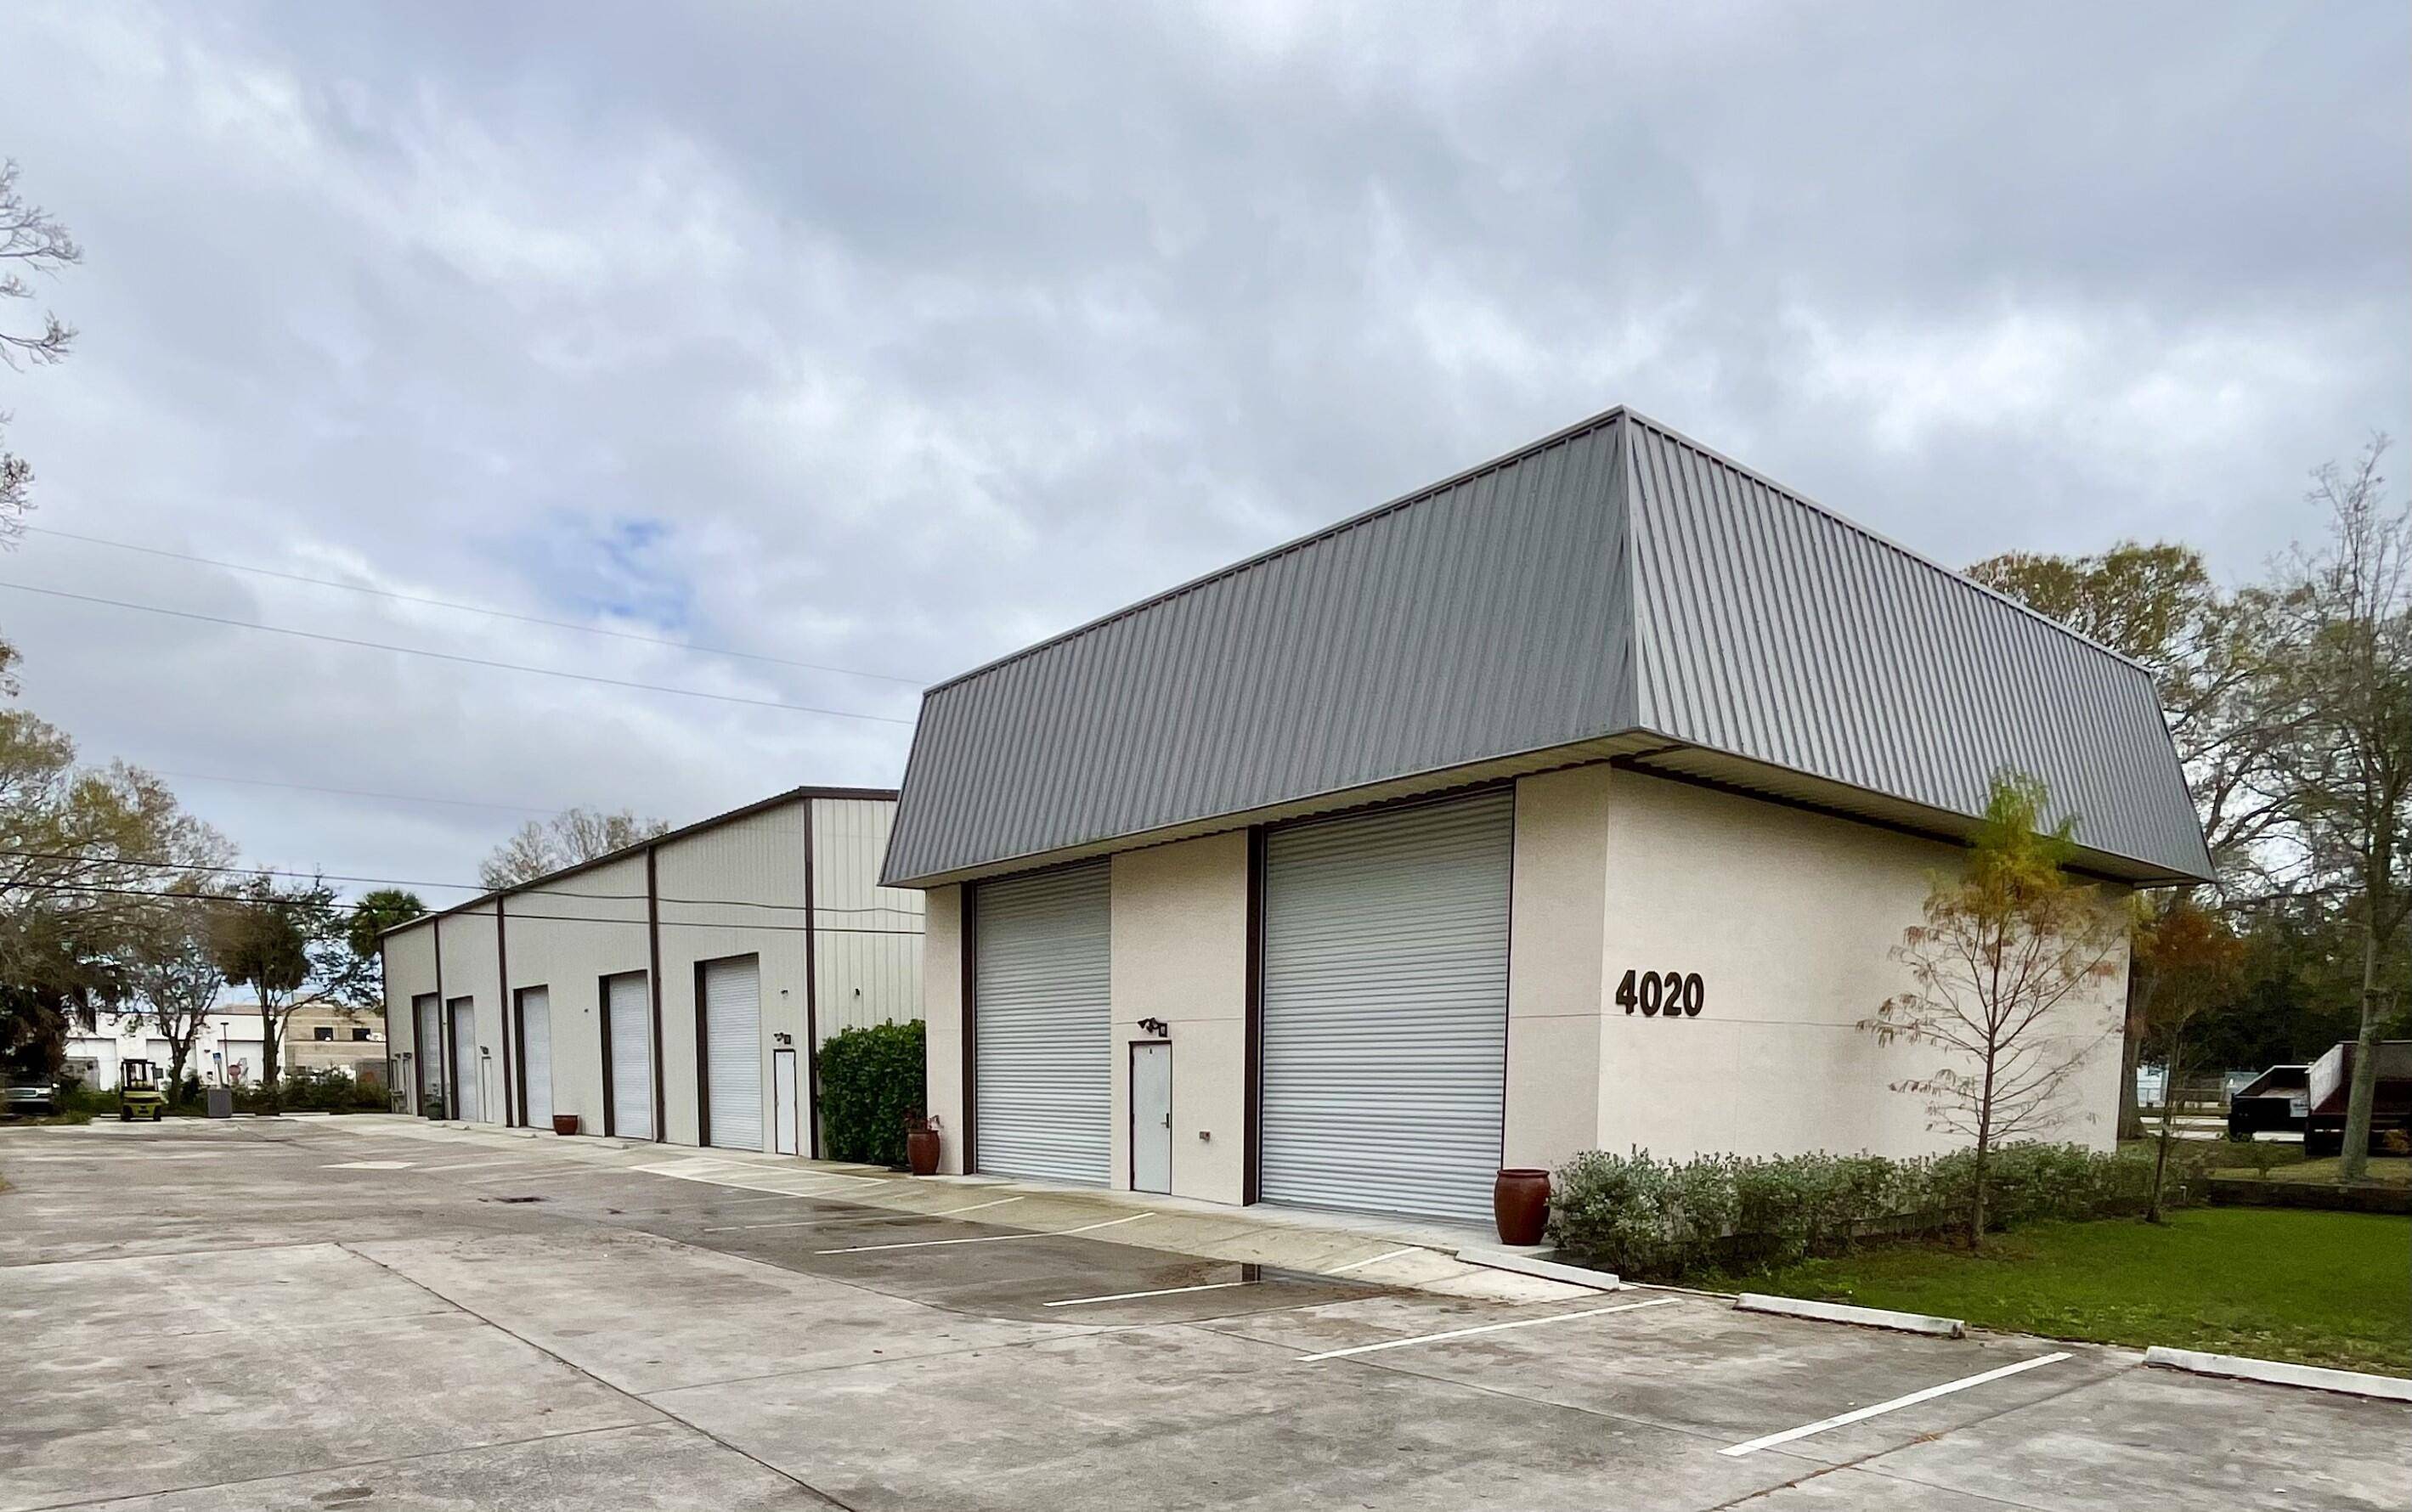 Rigid Red Iron Heavy Commercial Beam Steel Frame concreet block stucco Warehouse with Metal roof featuring 4 storage units.